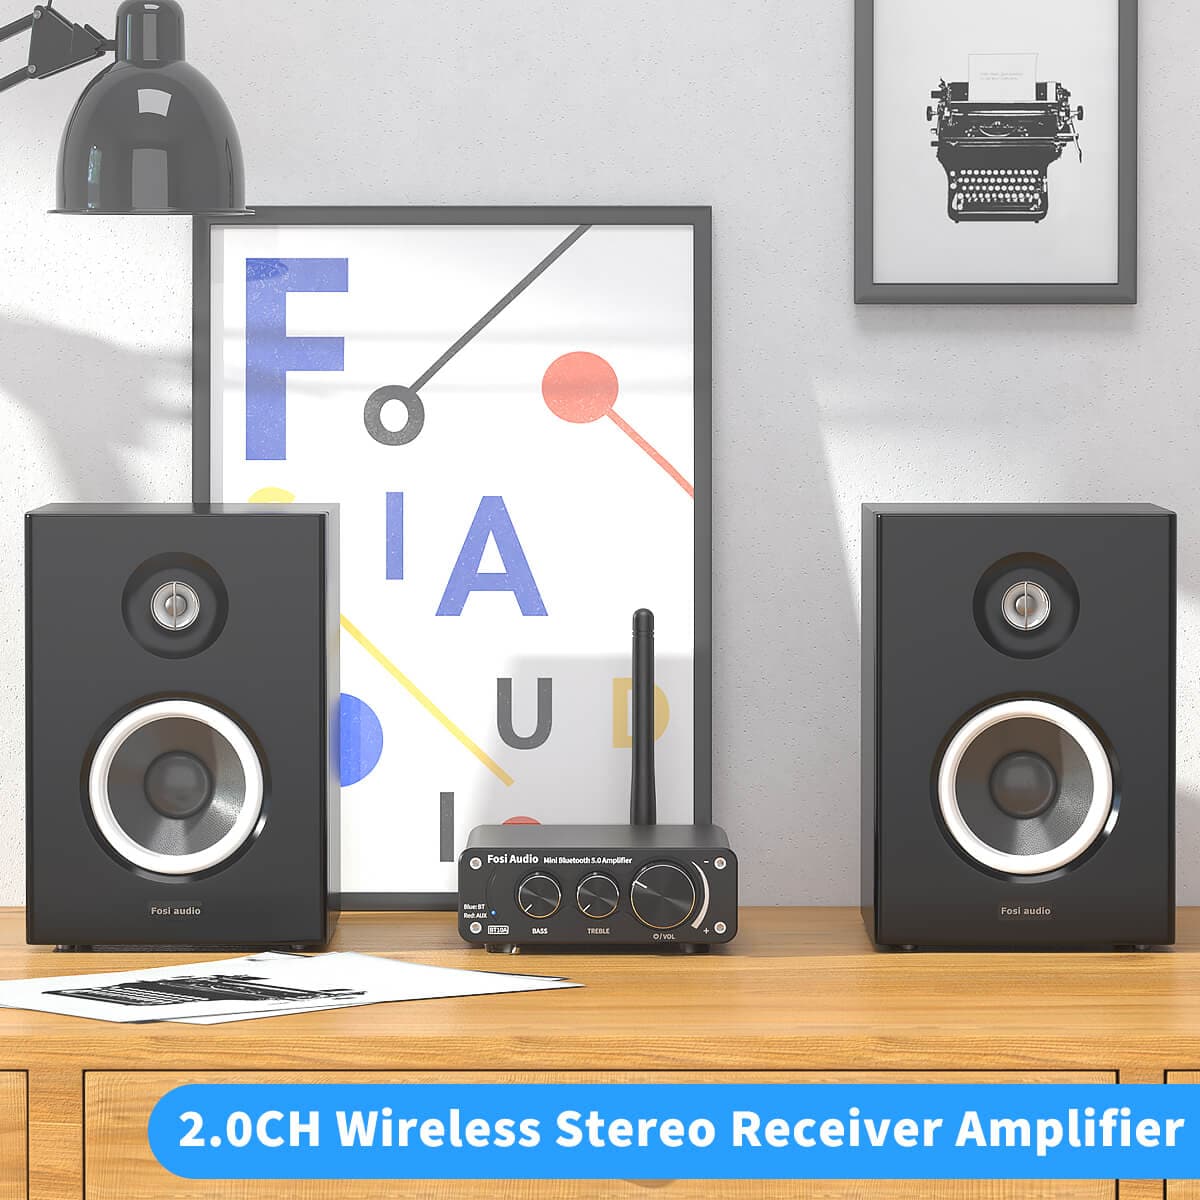 2.0ch wireless stereo receiver amp